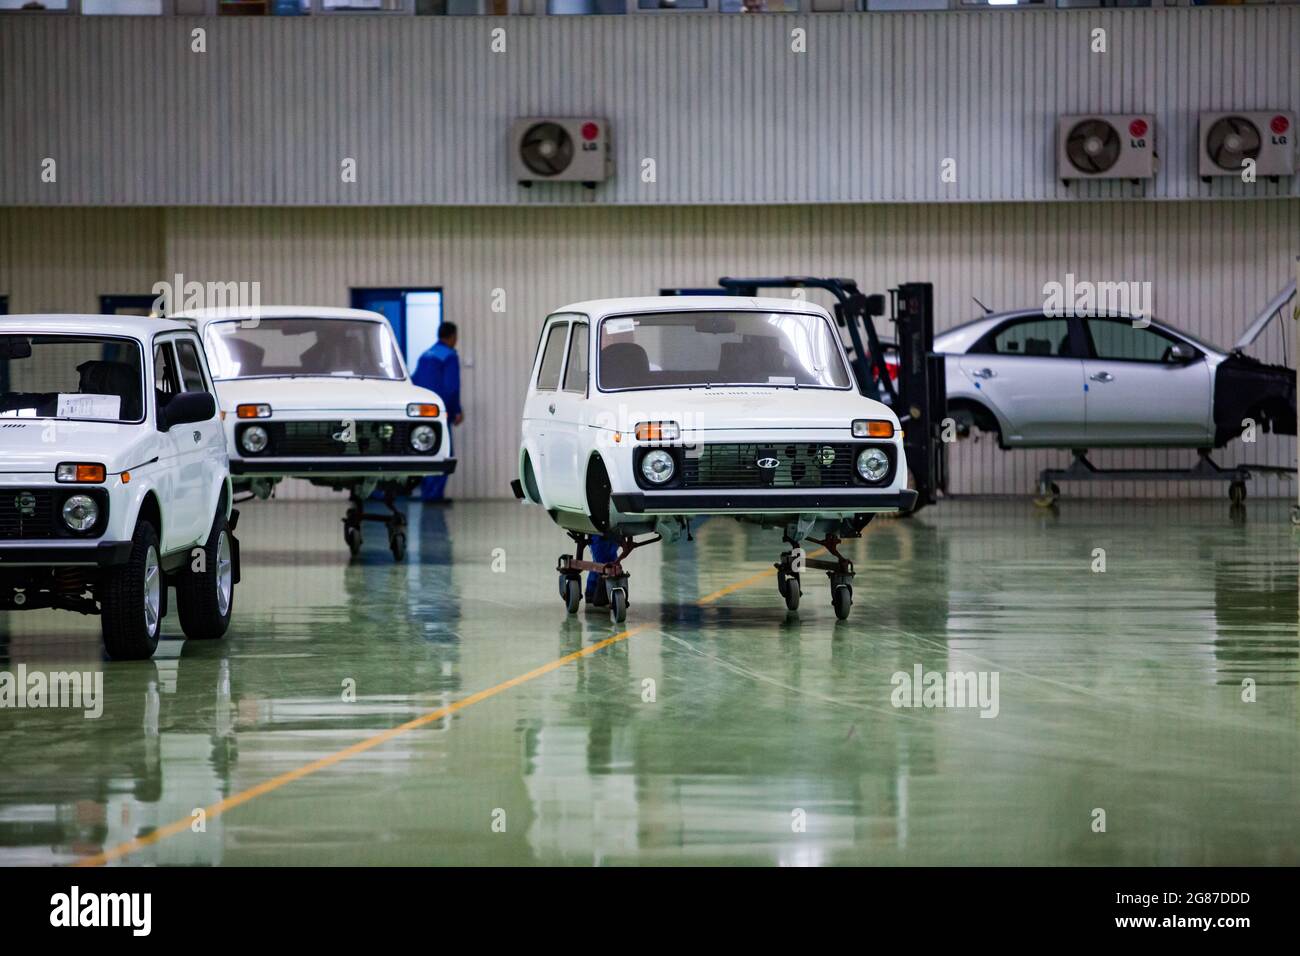 Ust'-Kamenogorsk, Kazakhstan - May 31,2012: Asia-Auto company auto-building plant. Lada VAZ car bodies on dollies. Moving to assembling line. Stock Photo